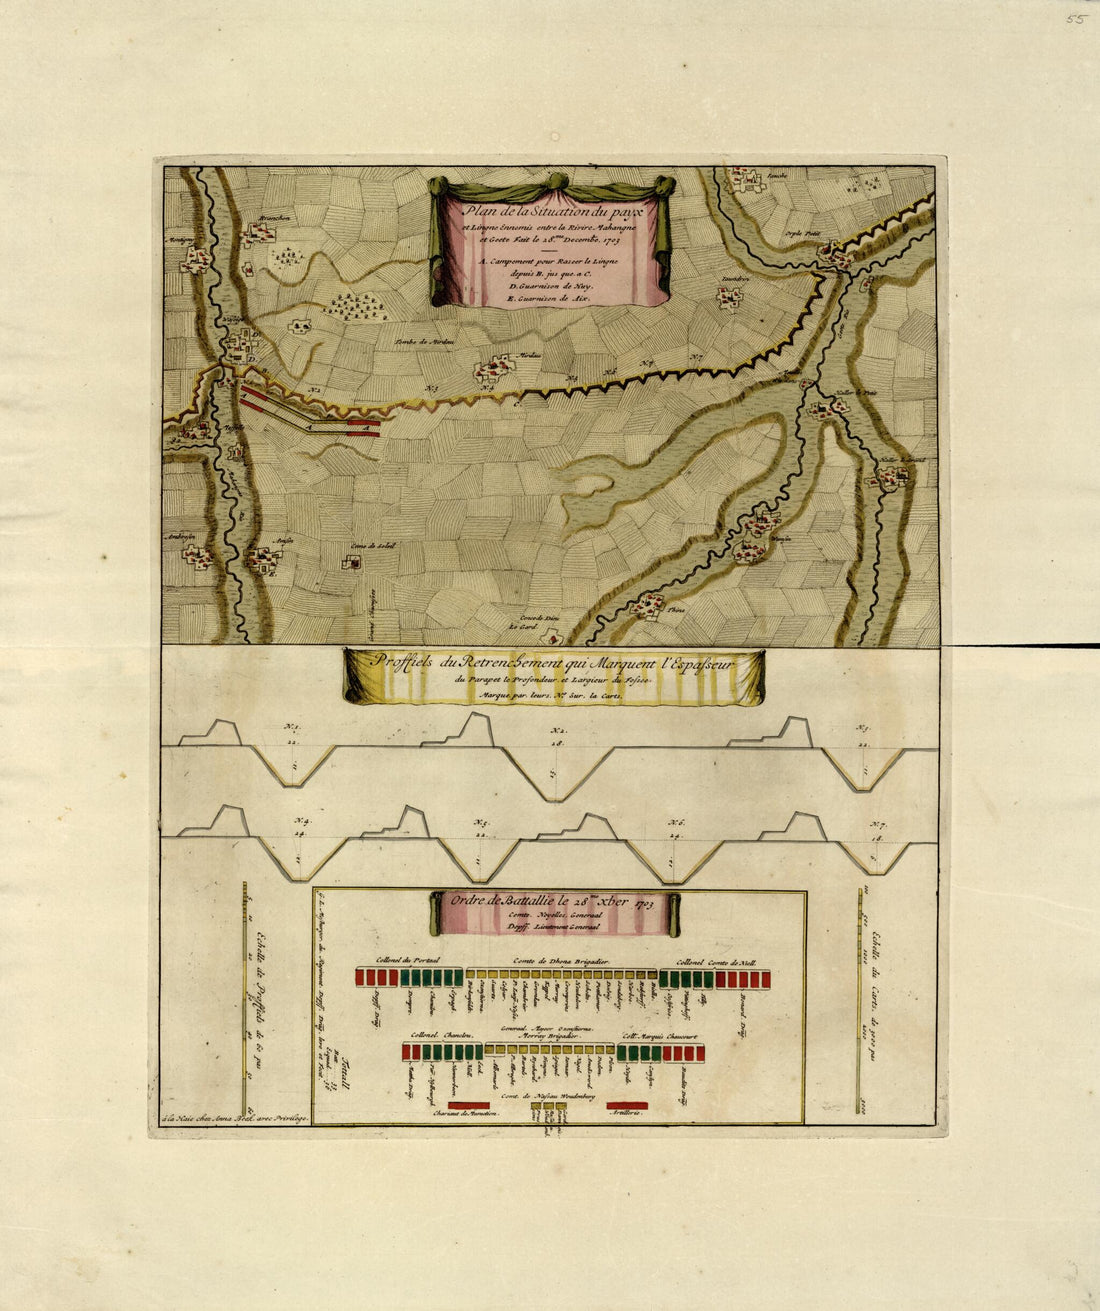 This old map of Plan De La Situation Du Payx Et Ligne Ennemis Entre La Riviere Mahangne from a Collection of Plans of Fortifications and Battles, 1684-from 1709 from 1709 was created by Anna Beeck in 1709